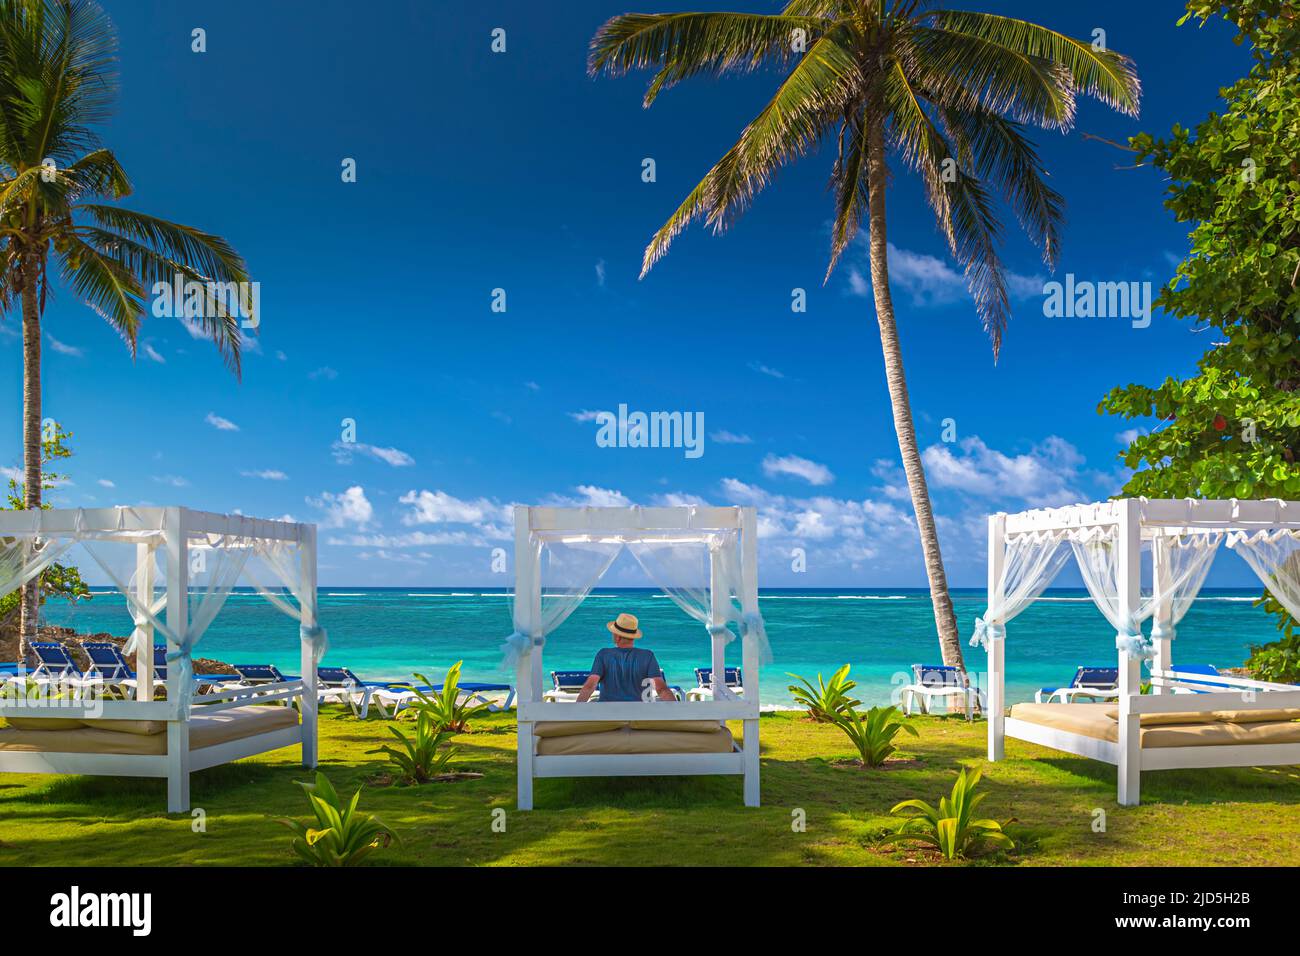 Man enjoys the beautiful view on a daybed at a resort, surrounded by the turquoise blue sea and plan trees near Baracoa, Cuba Stock Photo